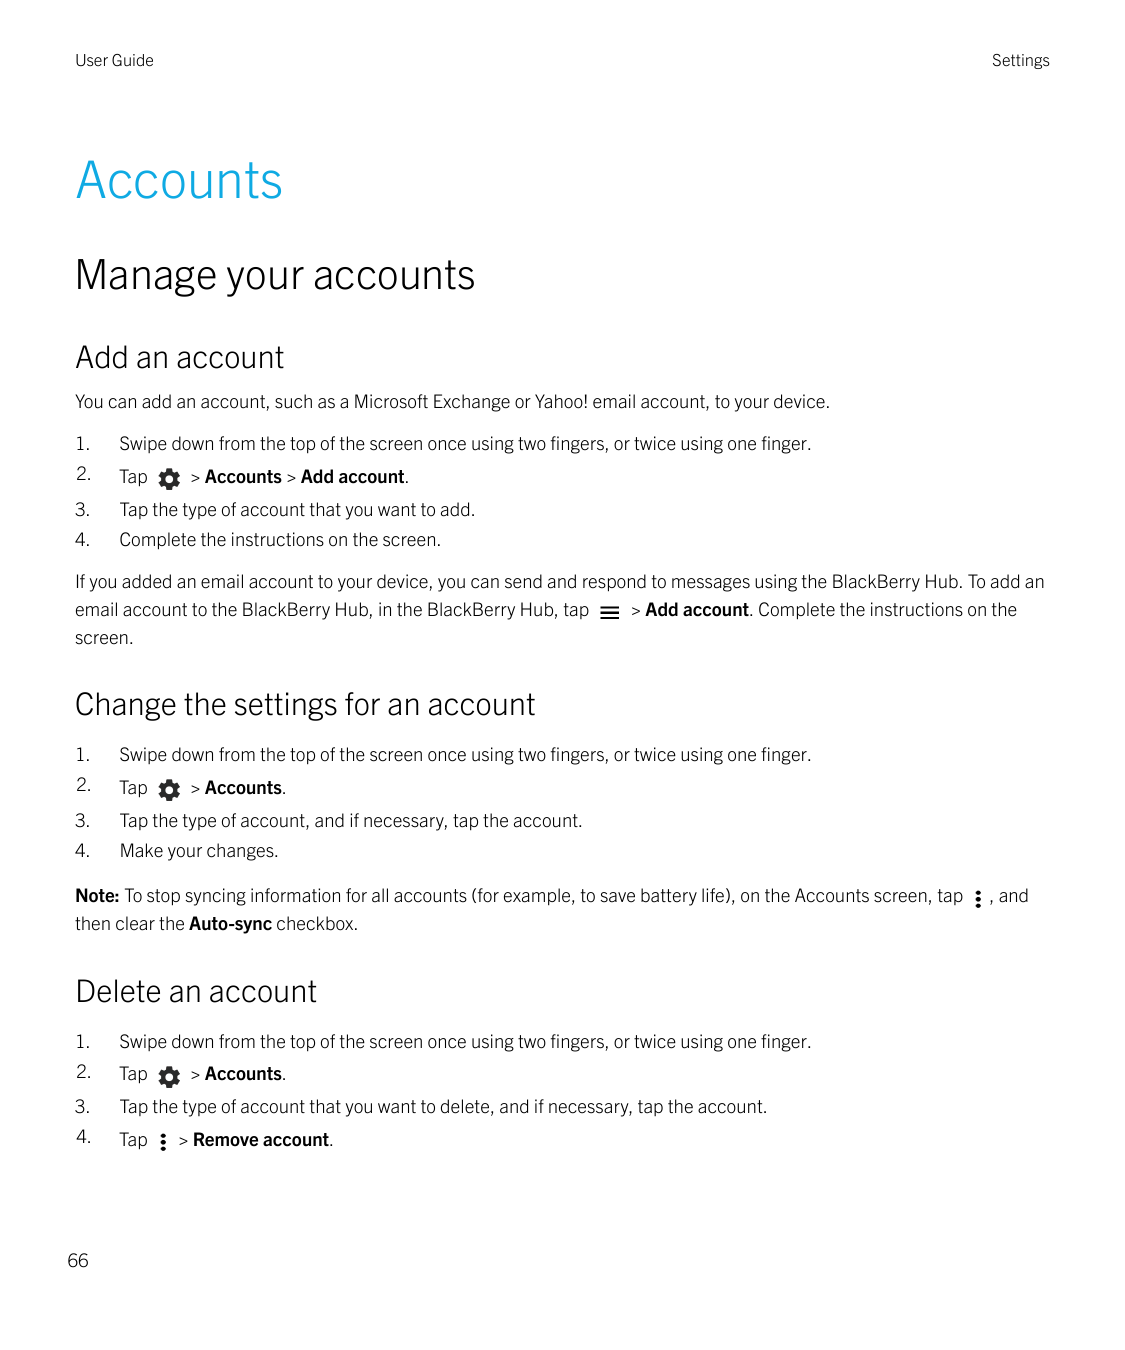 User GuideSettingsAccountsManage your accountsAdd an accountYou can add an account, such as a Microsoft Exchange or Yahoo! email